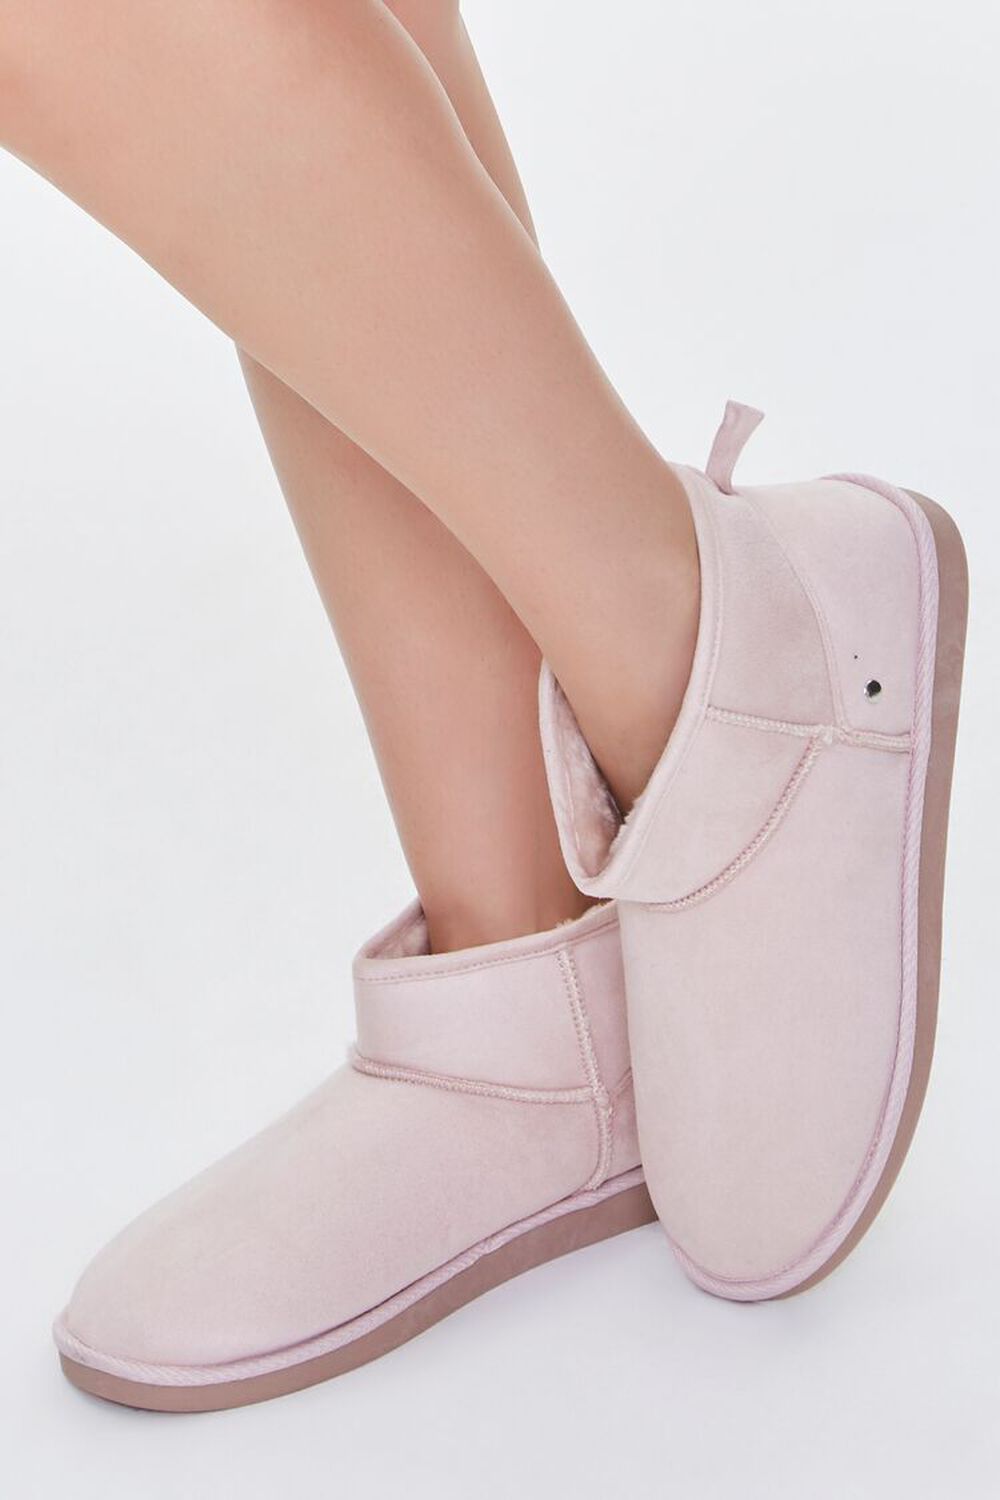 BLUSH Faux Suede Bootie Slippers, image 1